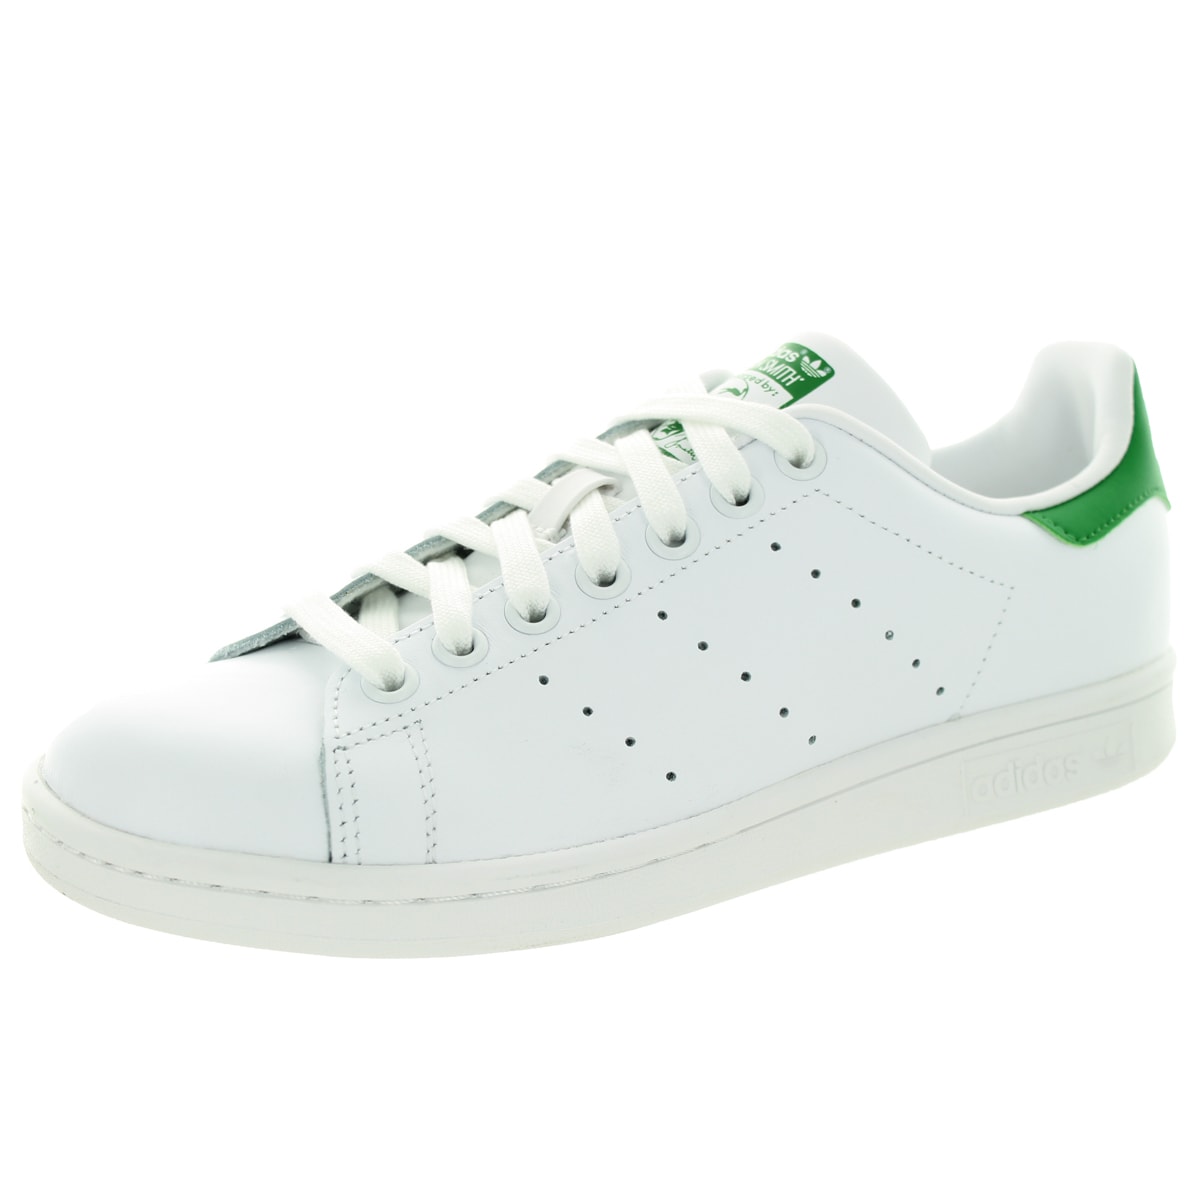 adidas sneakers stan smith womens